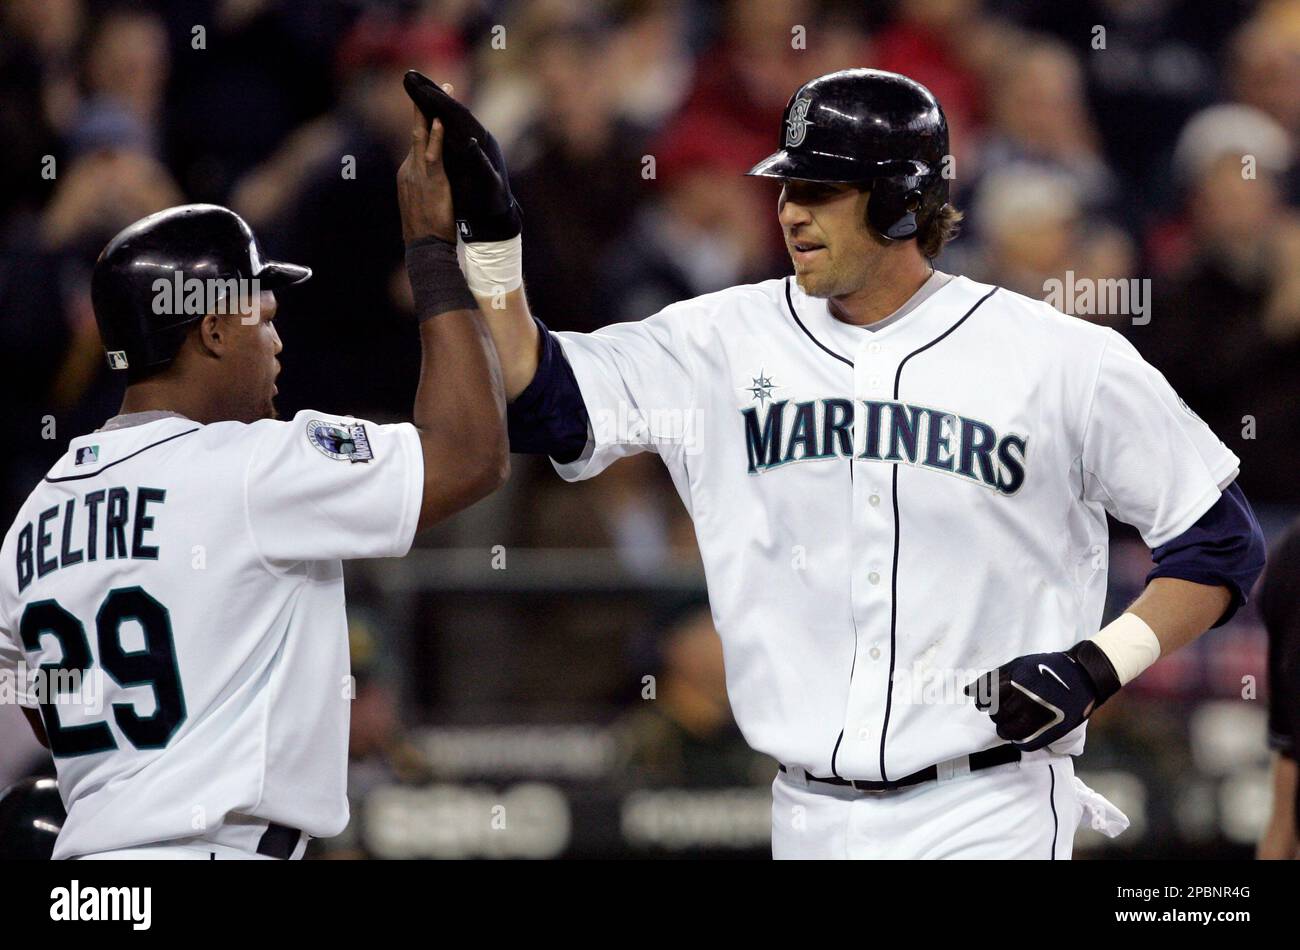 Seattle Mariners' Richie Sexson, right, is greeted at home by Adrian Beltre  following Sexson's seventh inning home run against the Oakland Athletics  during opening day at a baseball game, Monday, April 2